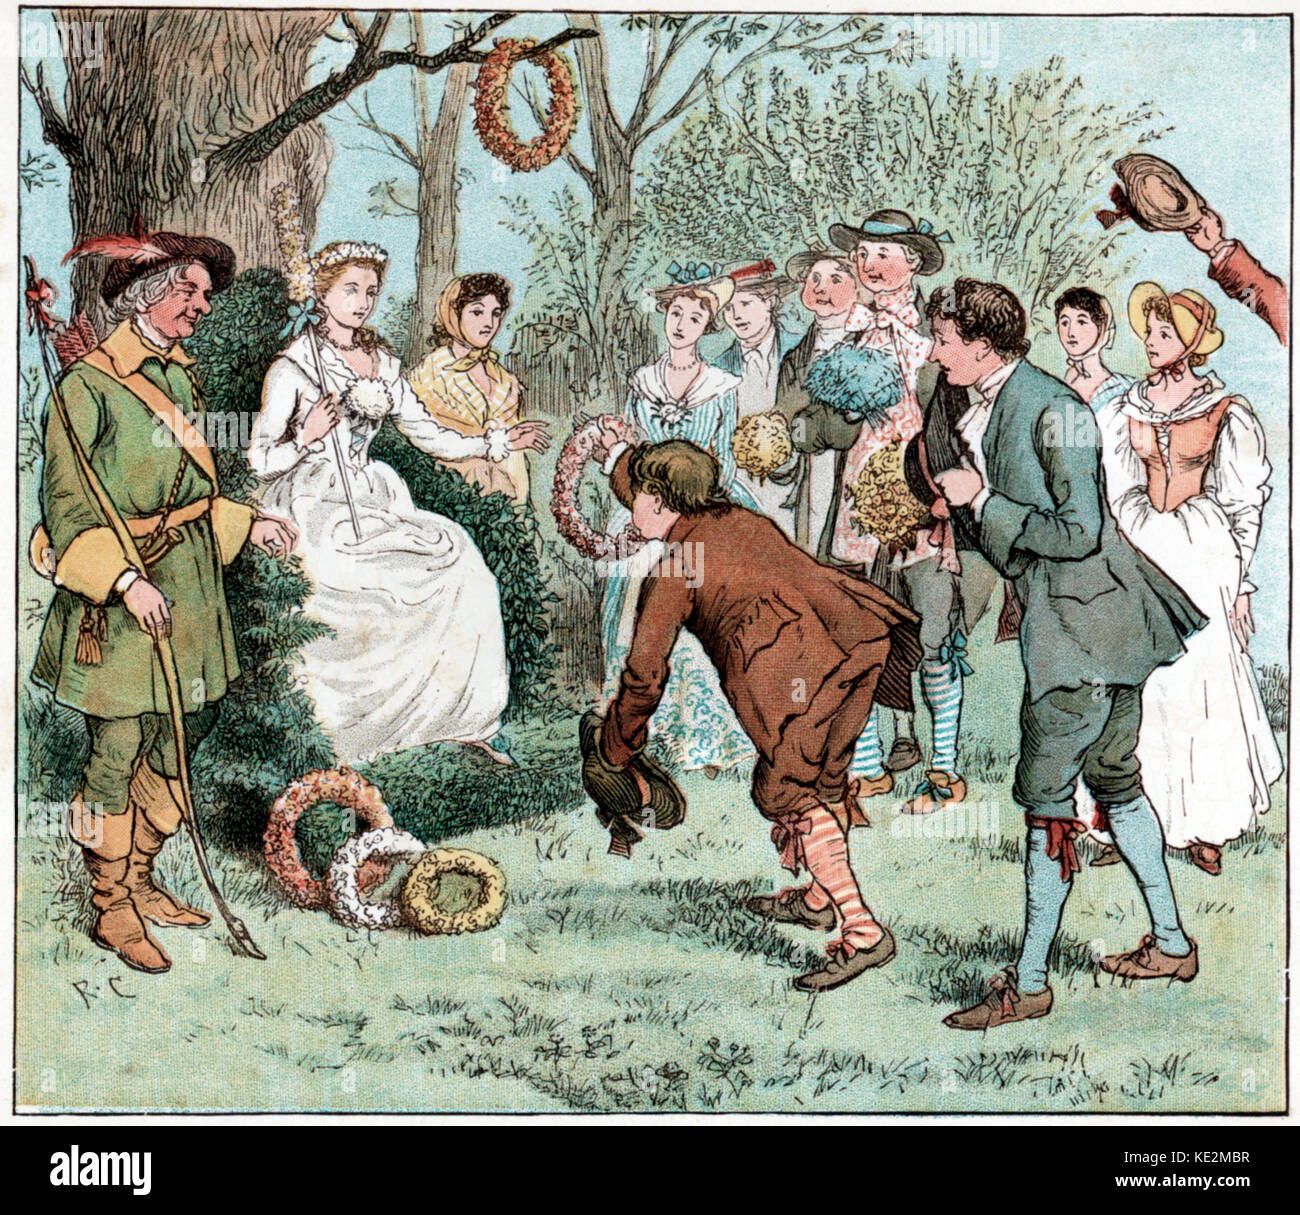 Men paying homage to the May Queen, 18th century.  By Randolph Caldecott (English illustrator, 22 March 1846 - 12 February 1886).  Bowing.  Flower wreaths.  Flowers.  Respect.  Breeches.  Gift.  Bow and arrows. Stock Photo